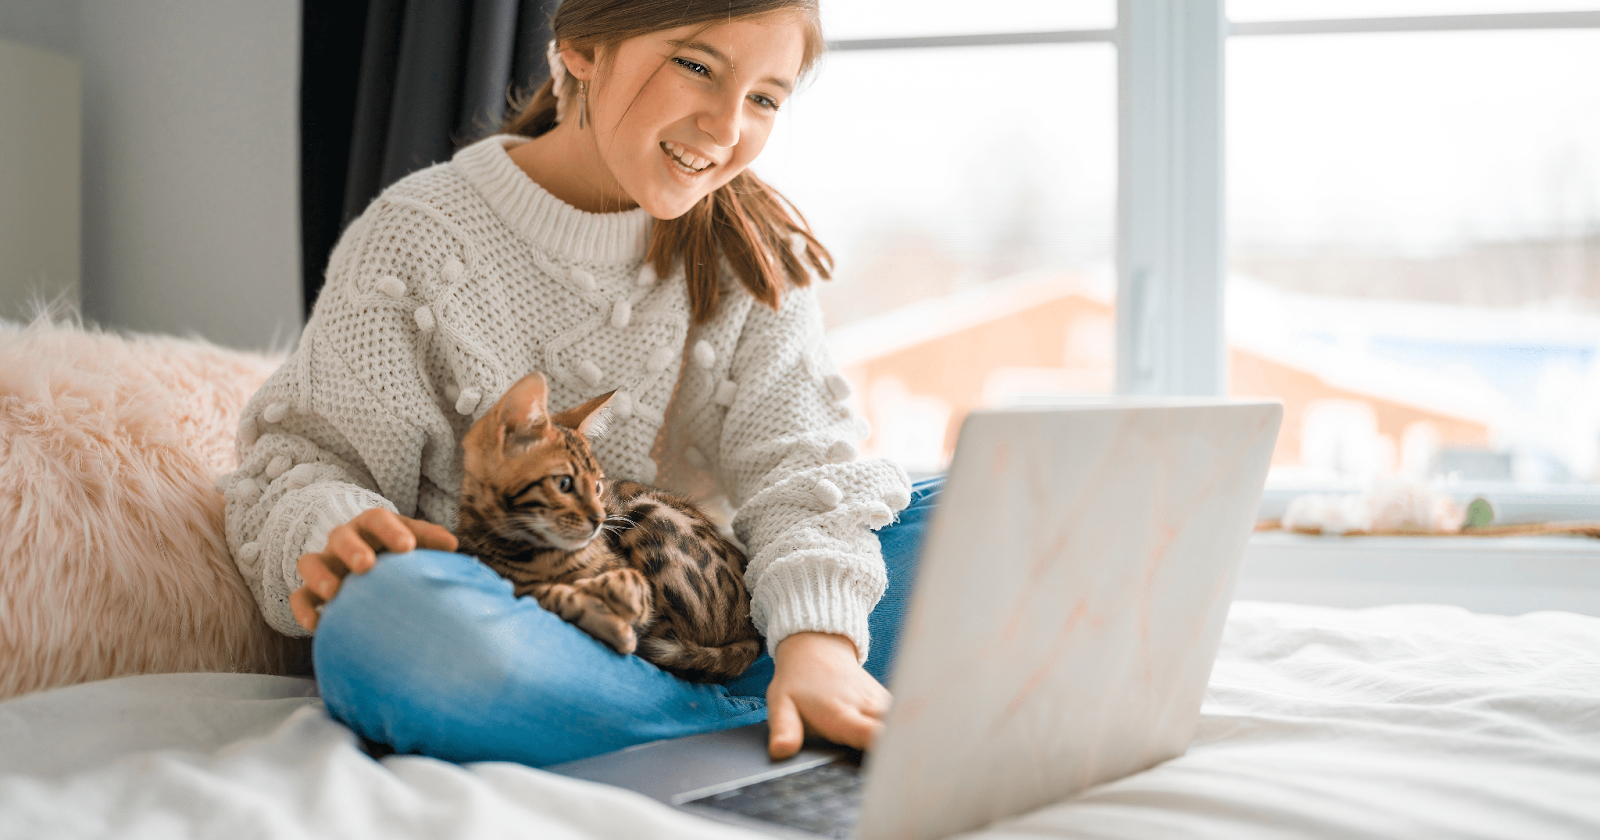 Girl working on laptop with Savannah cat in lap